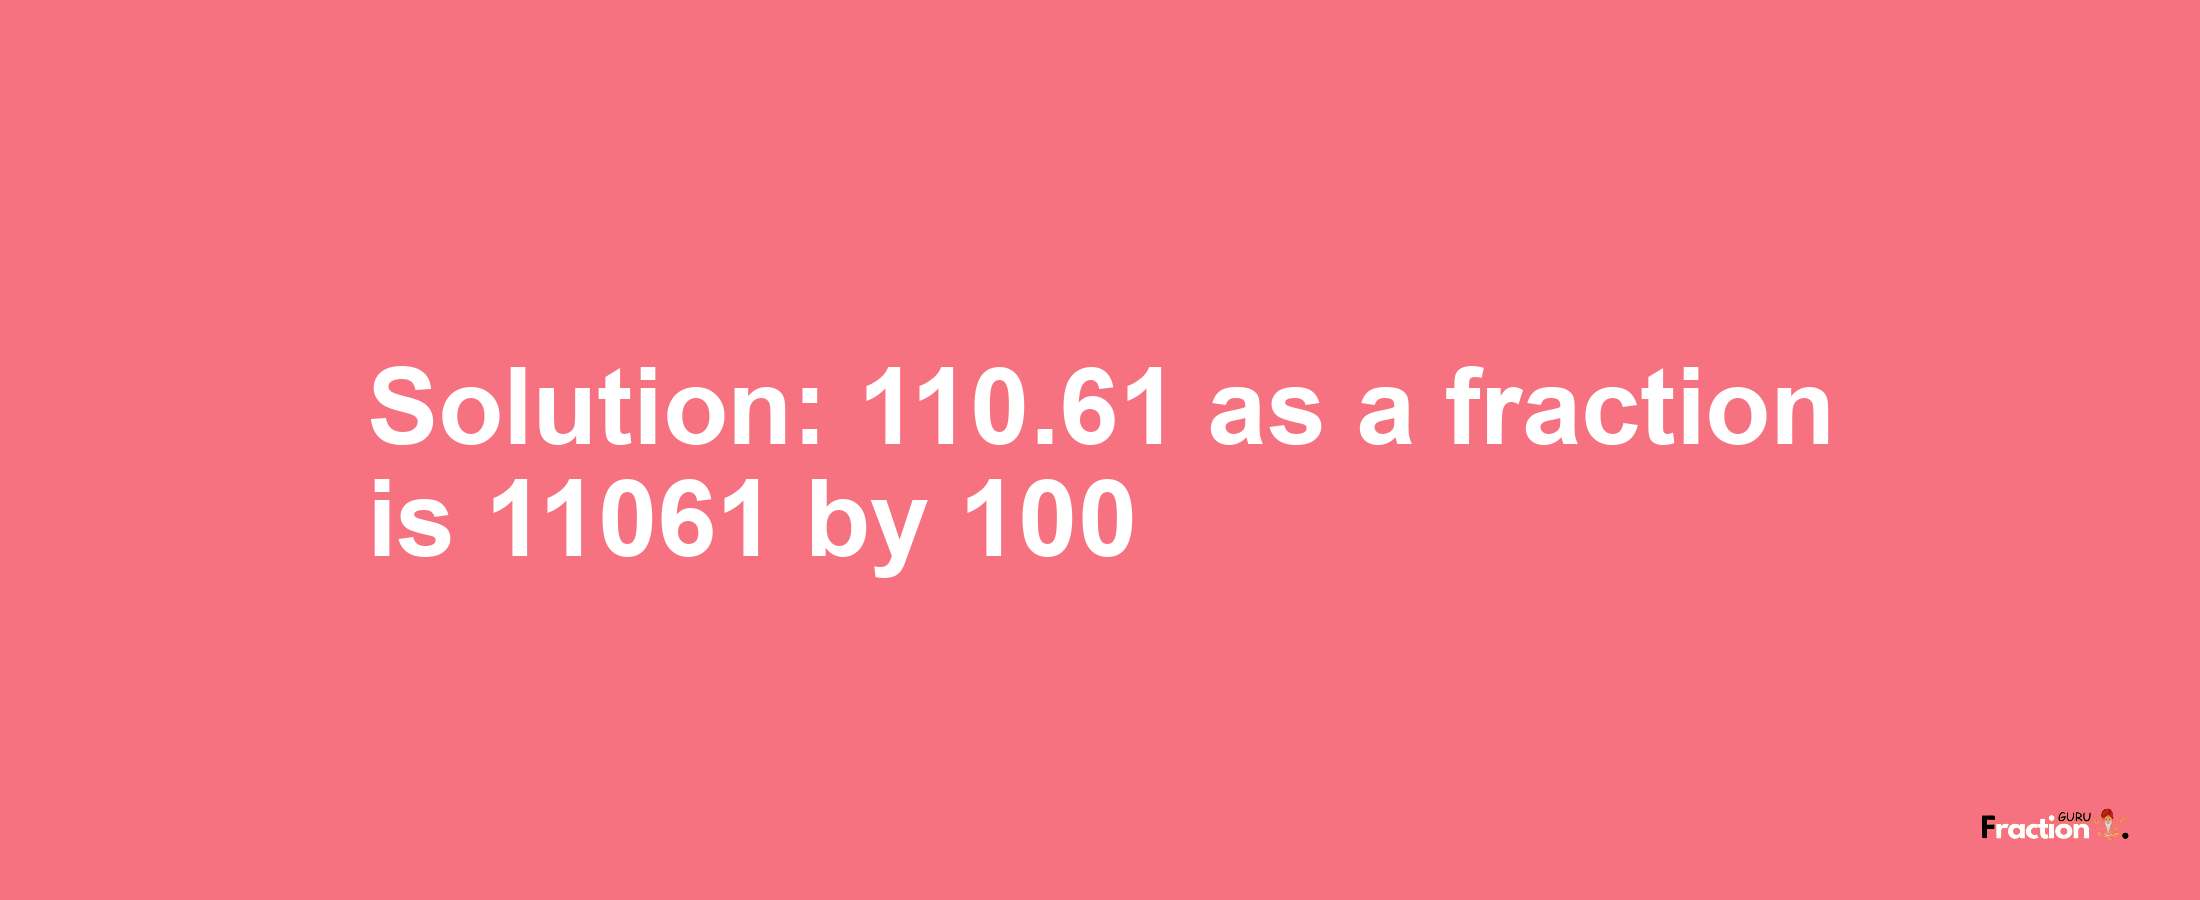 Solution:110.61 as a fraction is 11061/100